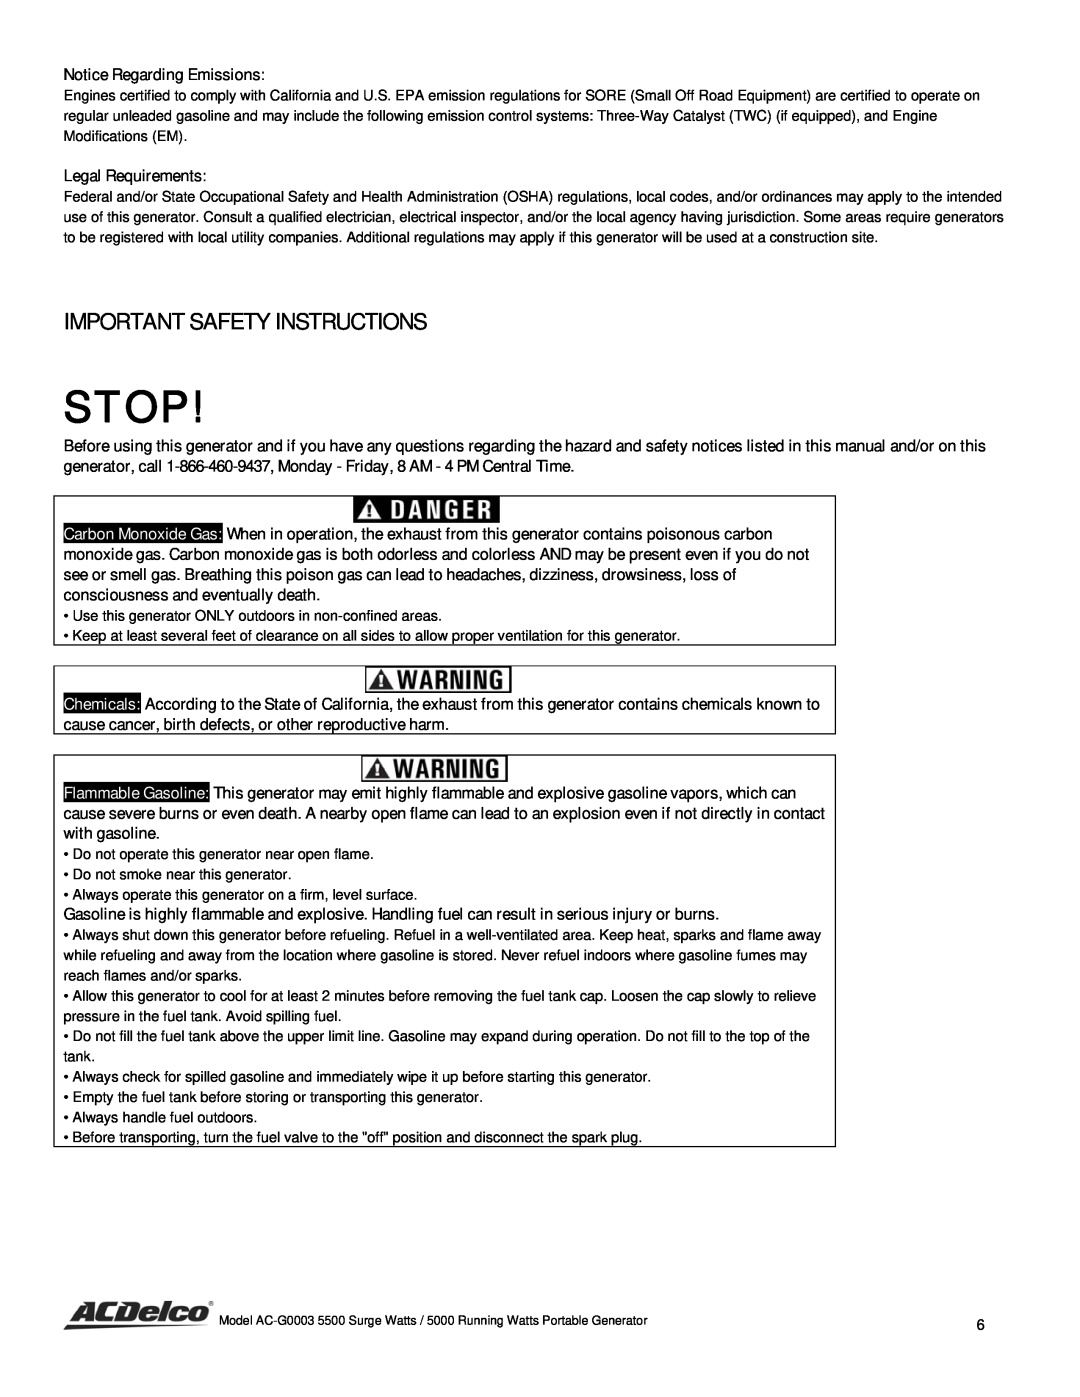 ACDelco AC-G0003 instruction manual Important Safety Instructions, Stop, Notice Regarding Emissions, Legal Requirements 